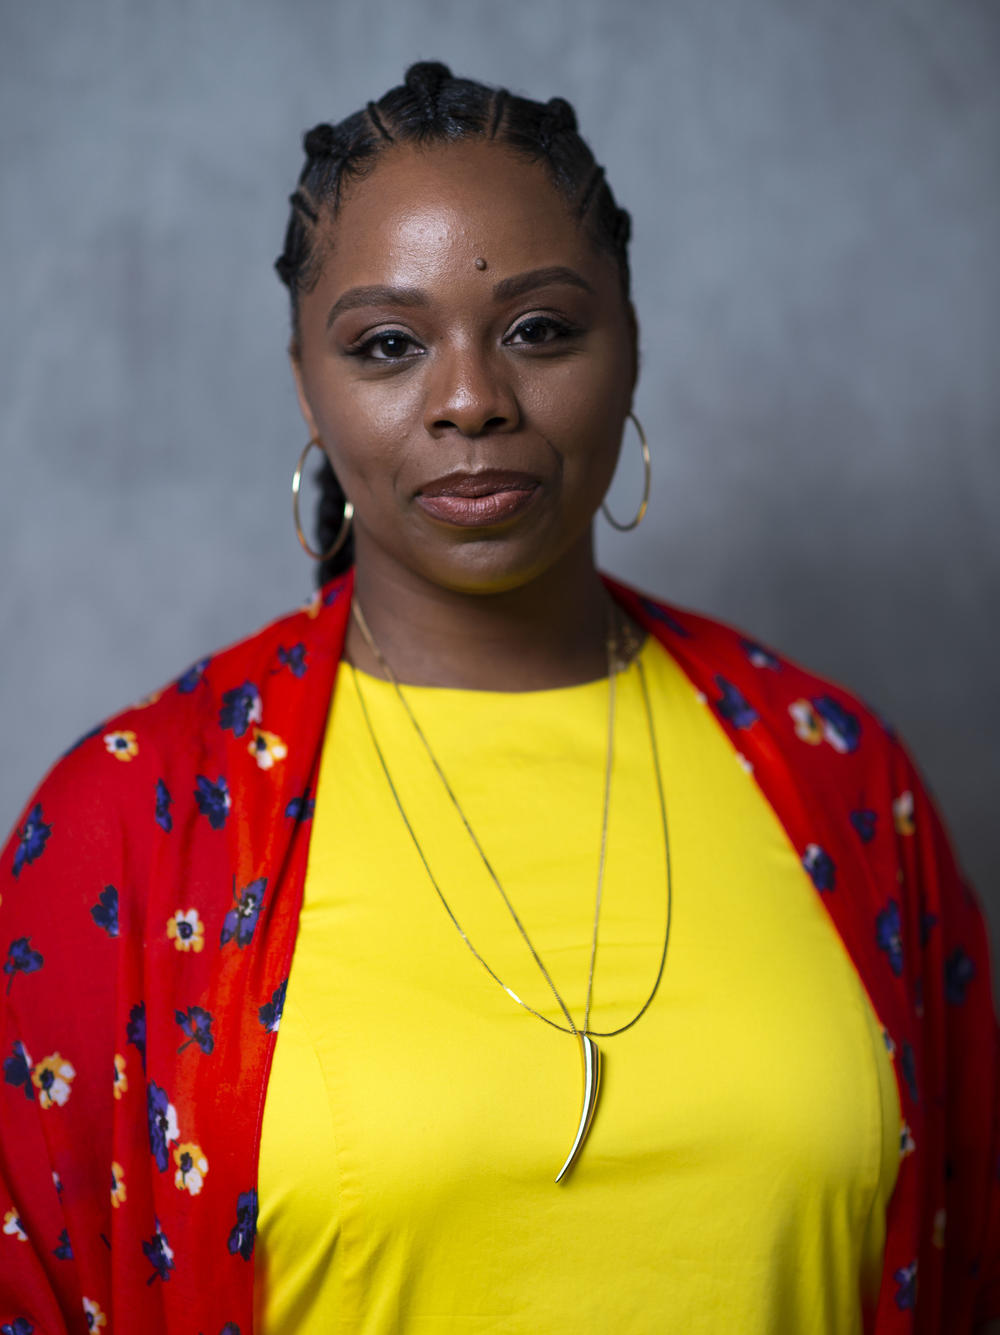 Patrisse Khan Cullors is one of the three co-founders of Black Lives Matter Movement.